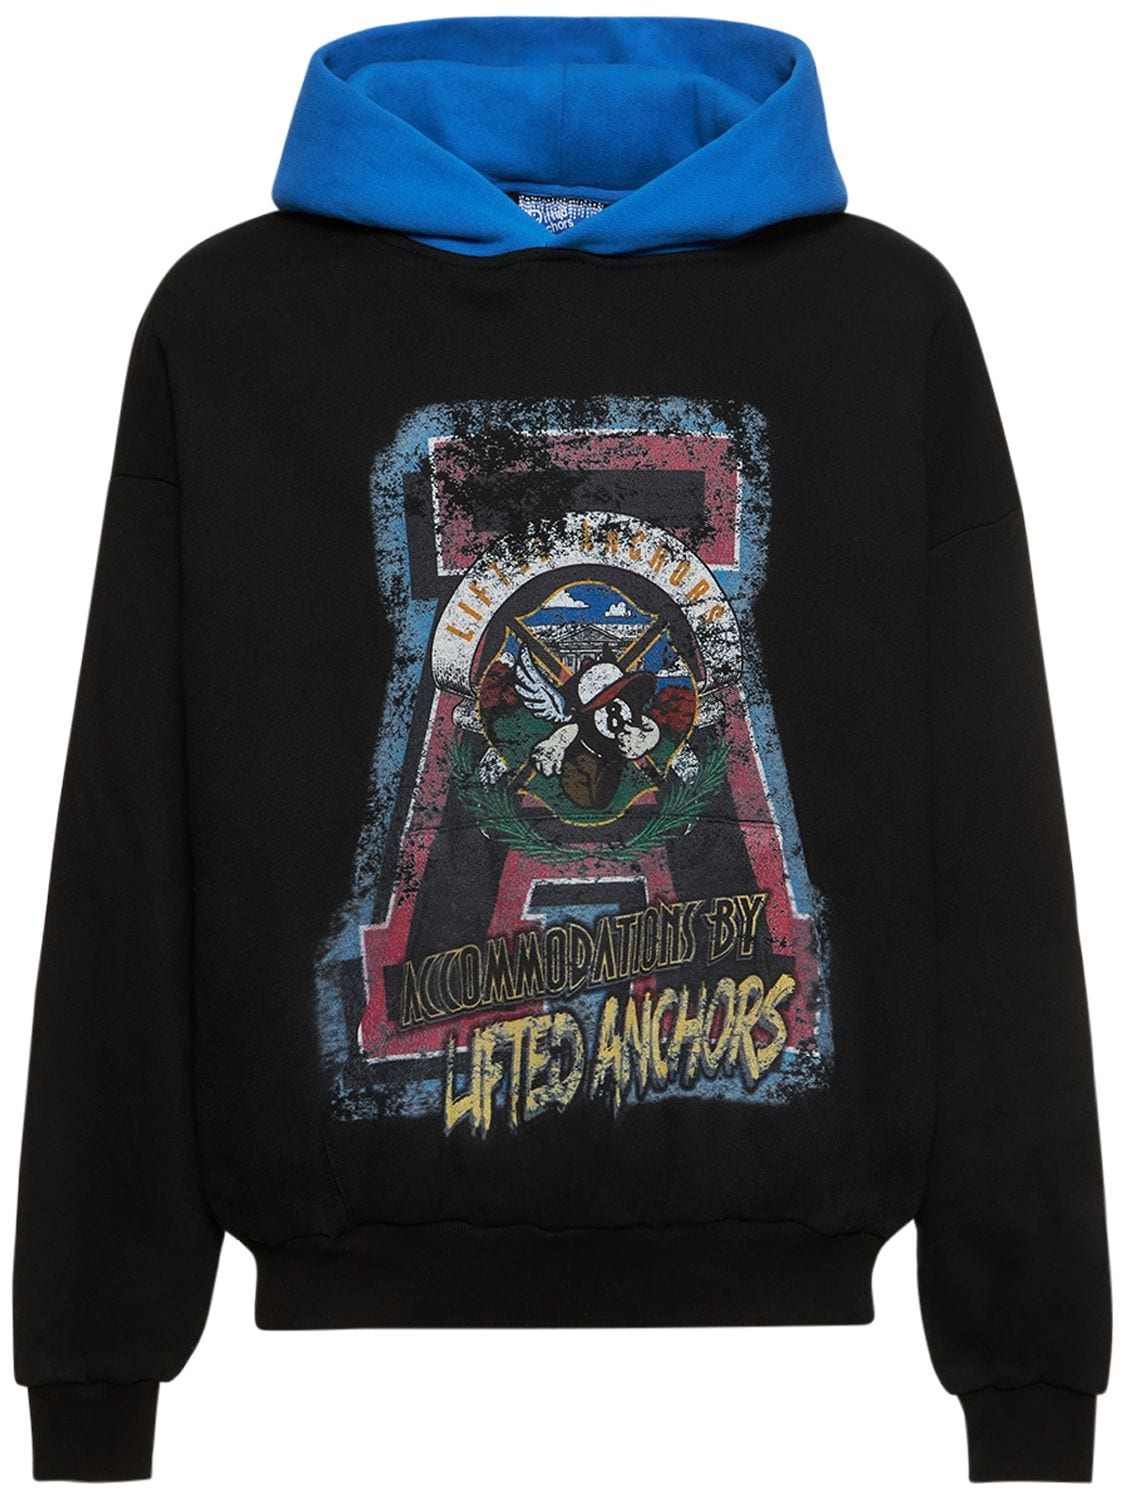 Lifted Anchors Accommodations Printed Hoodie In Black